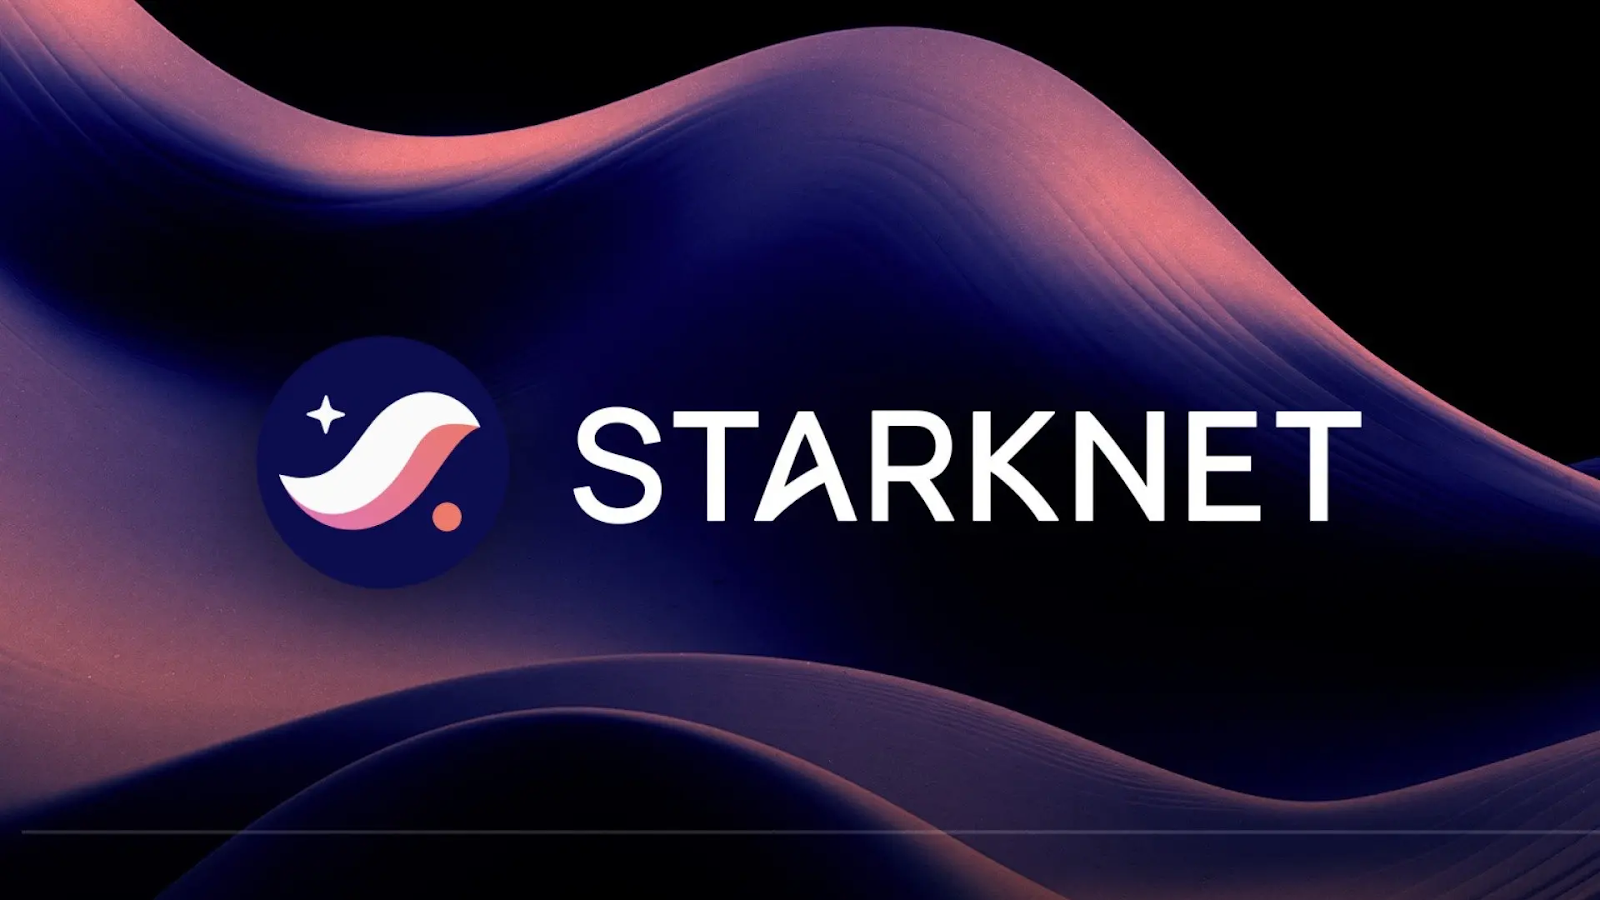 Starknet Hits Top 100, But MoonBag’s Presale Promises Unmatched Rewards – Here’s Why